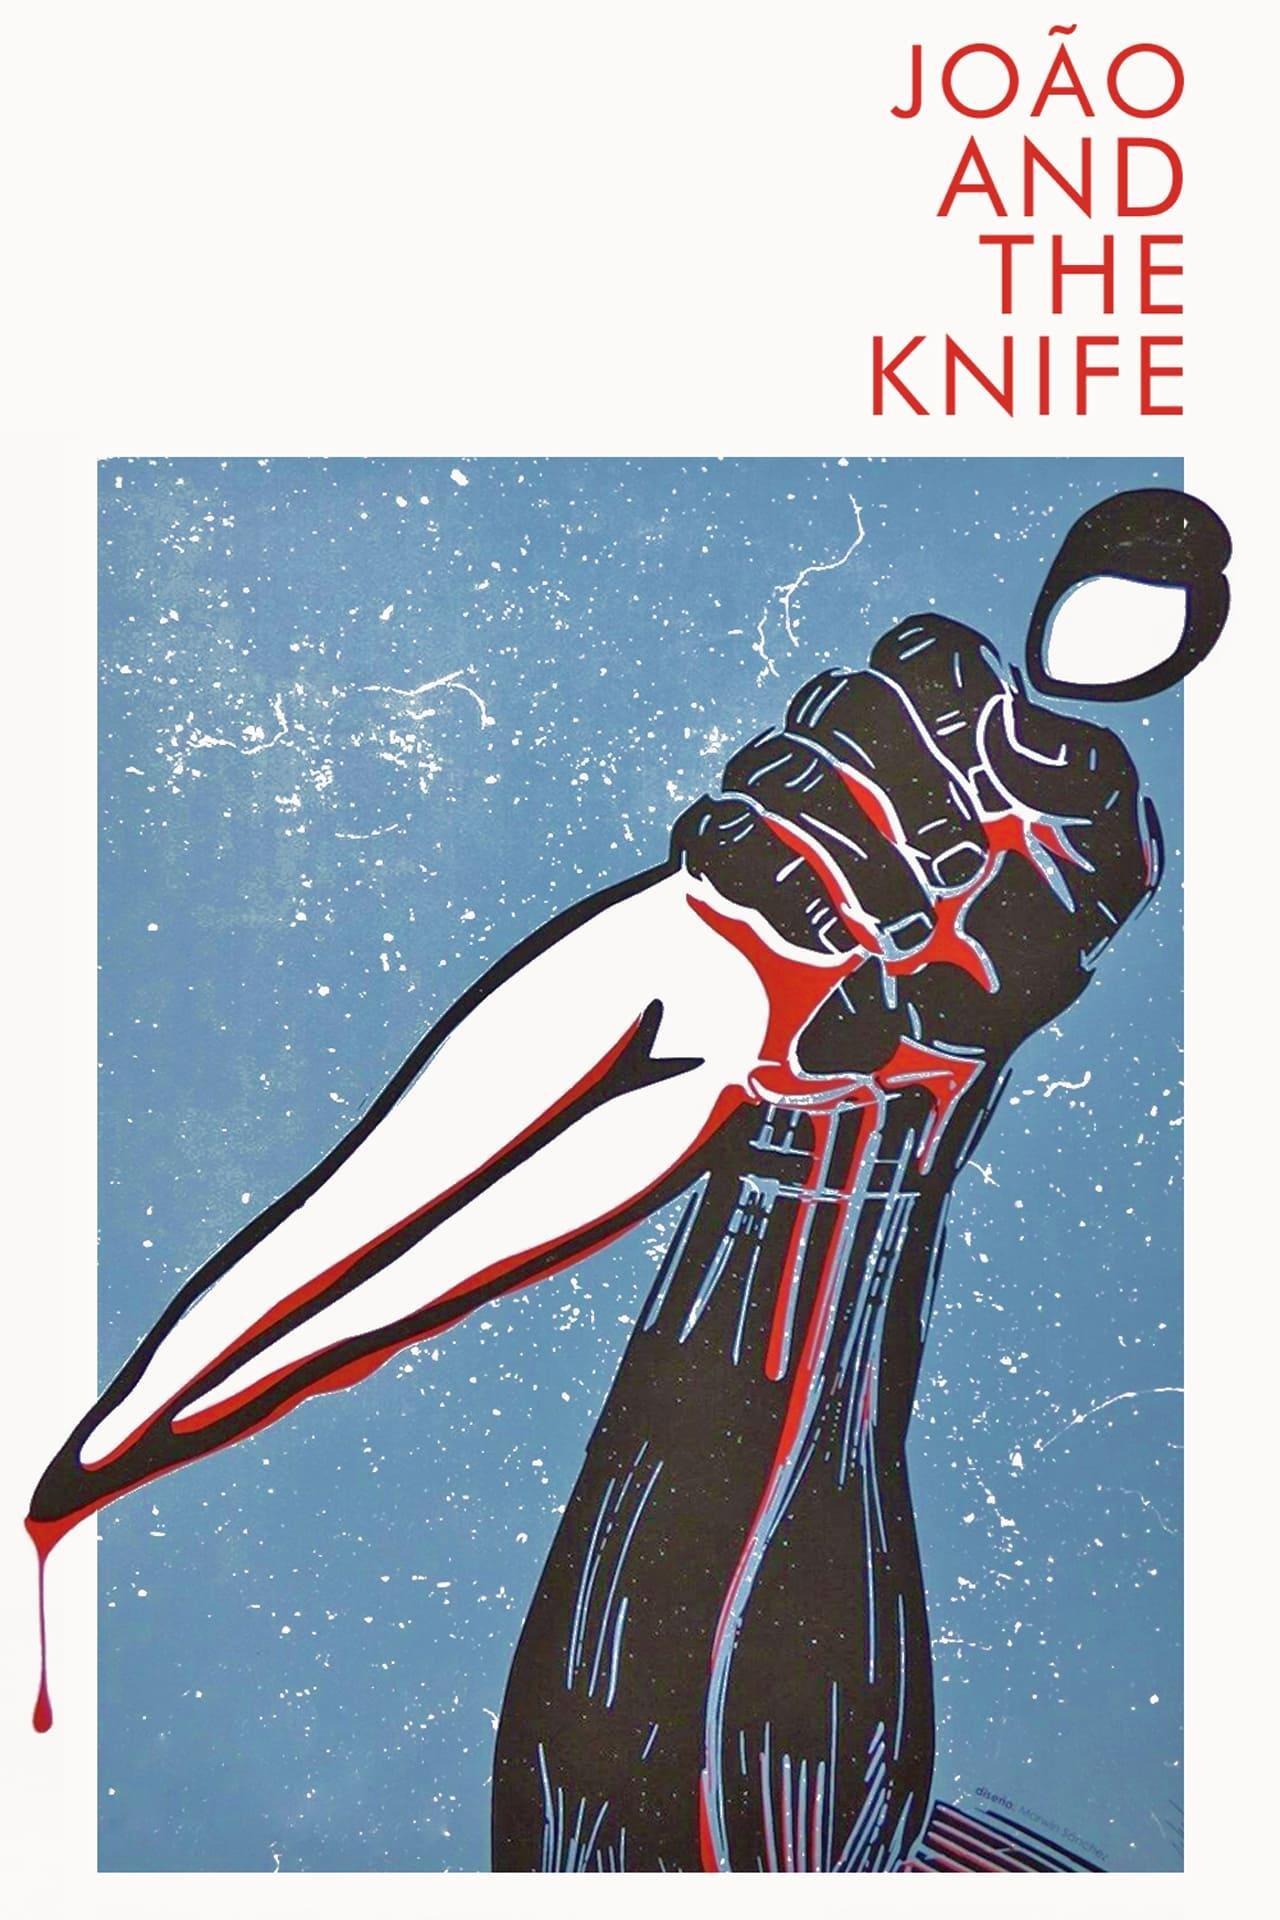 João and the Knife poster